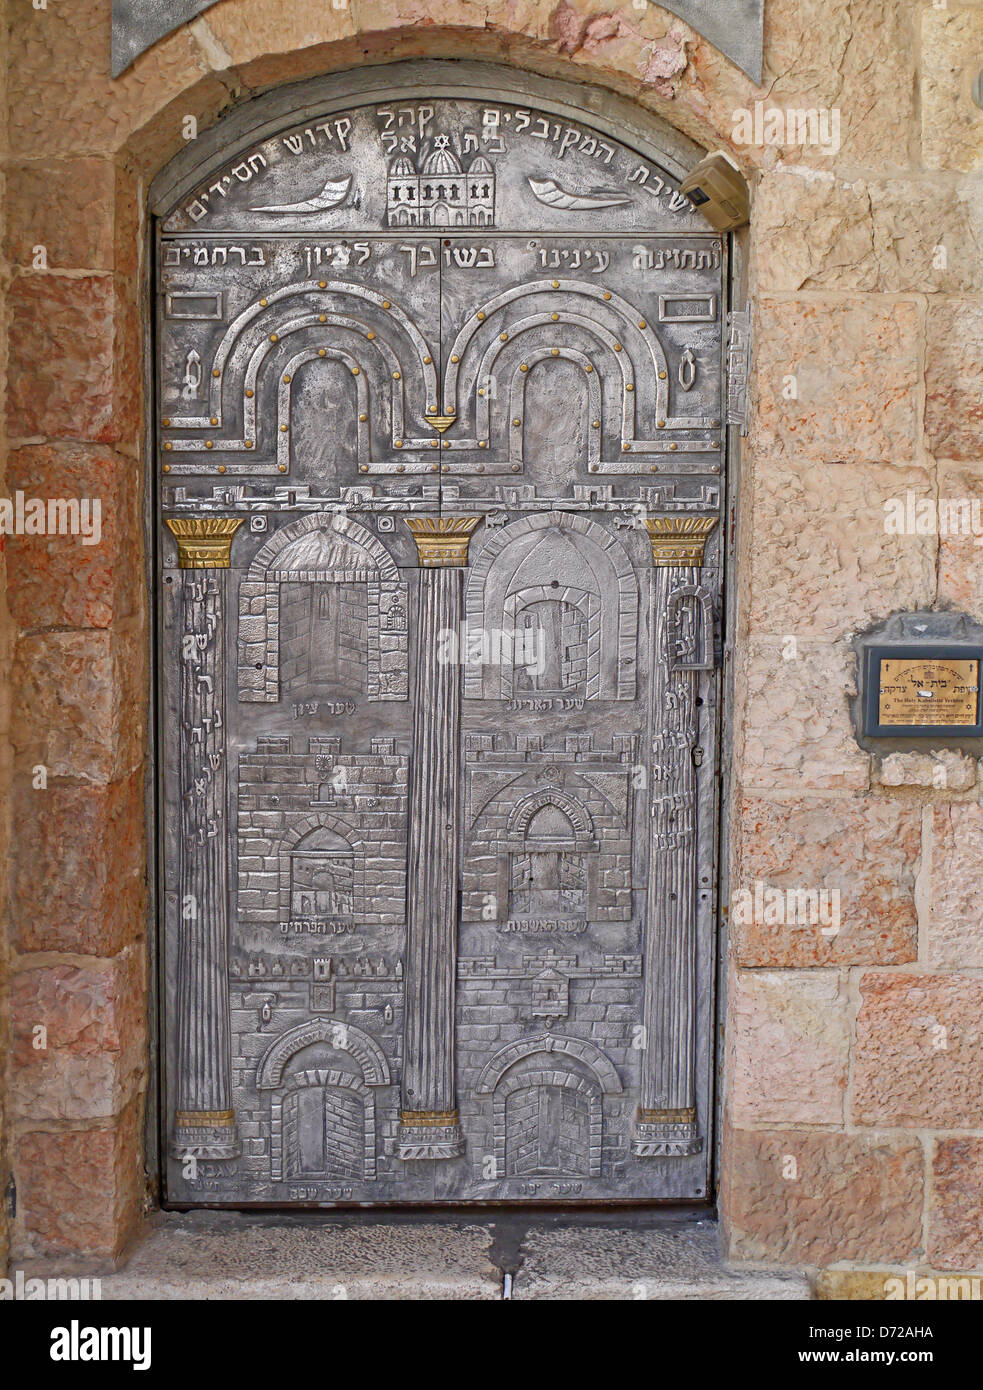 Jerusalem, synagogue door decorated with scenes of the Old City's gates Stock Photo